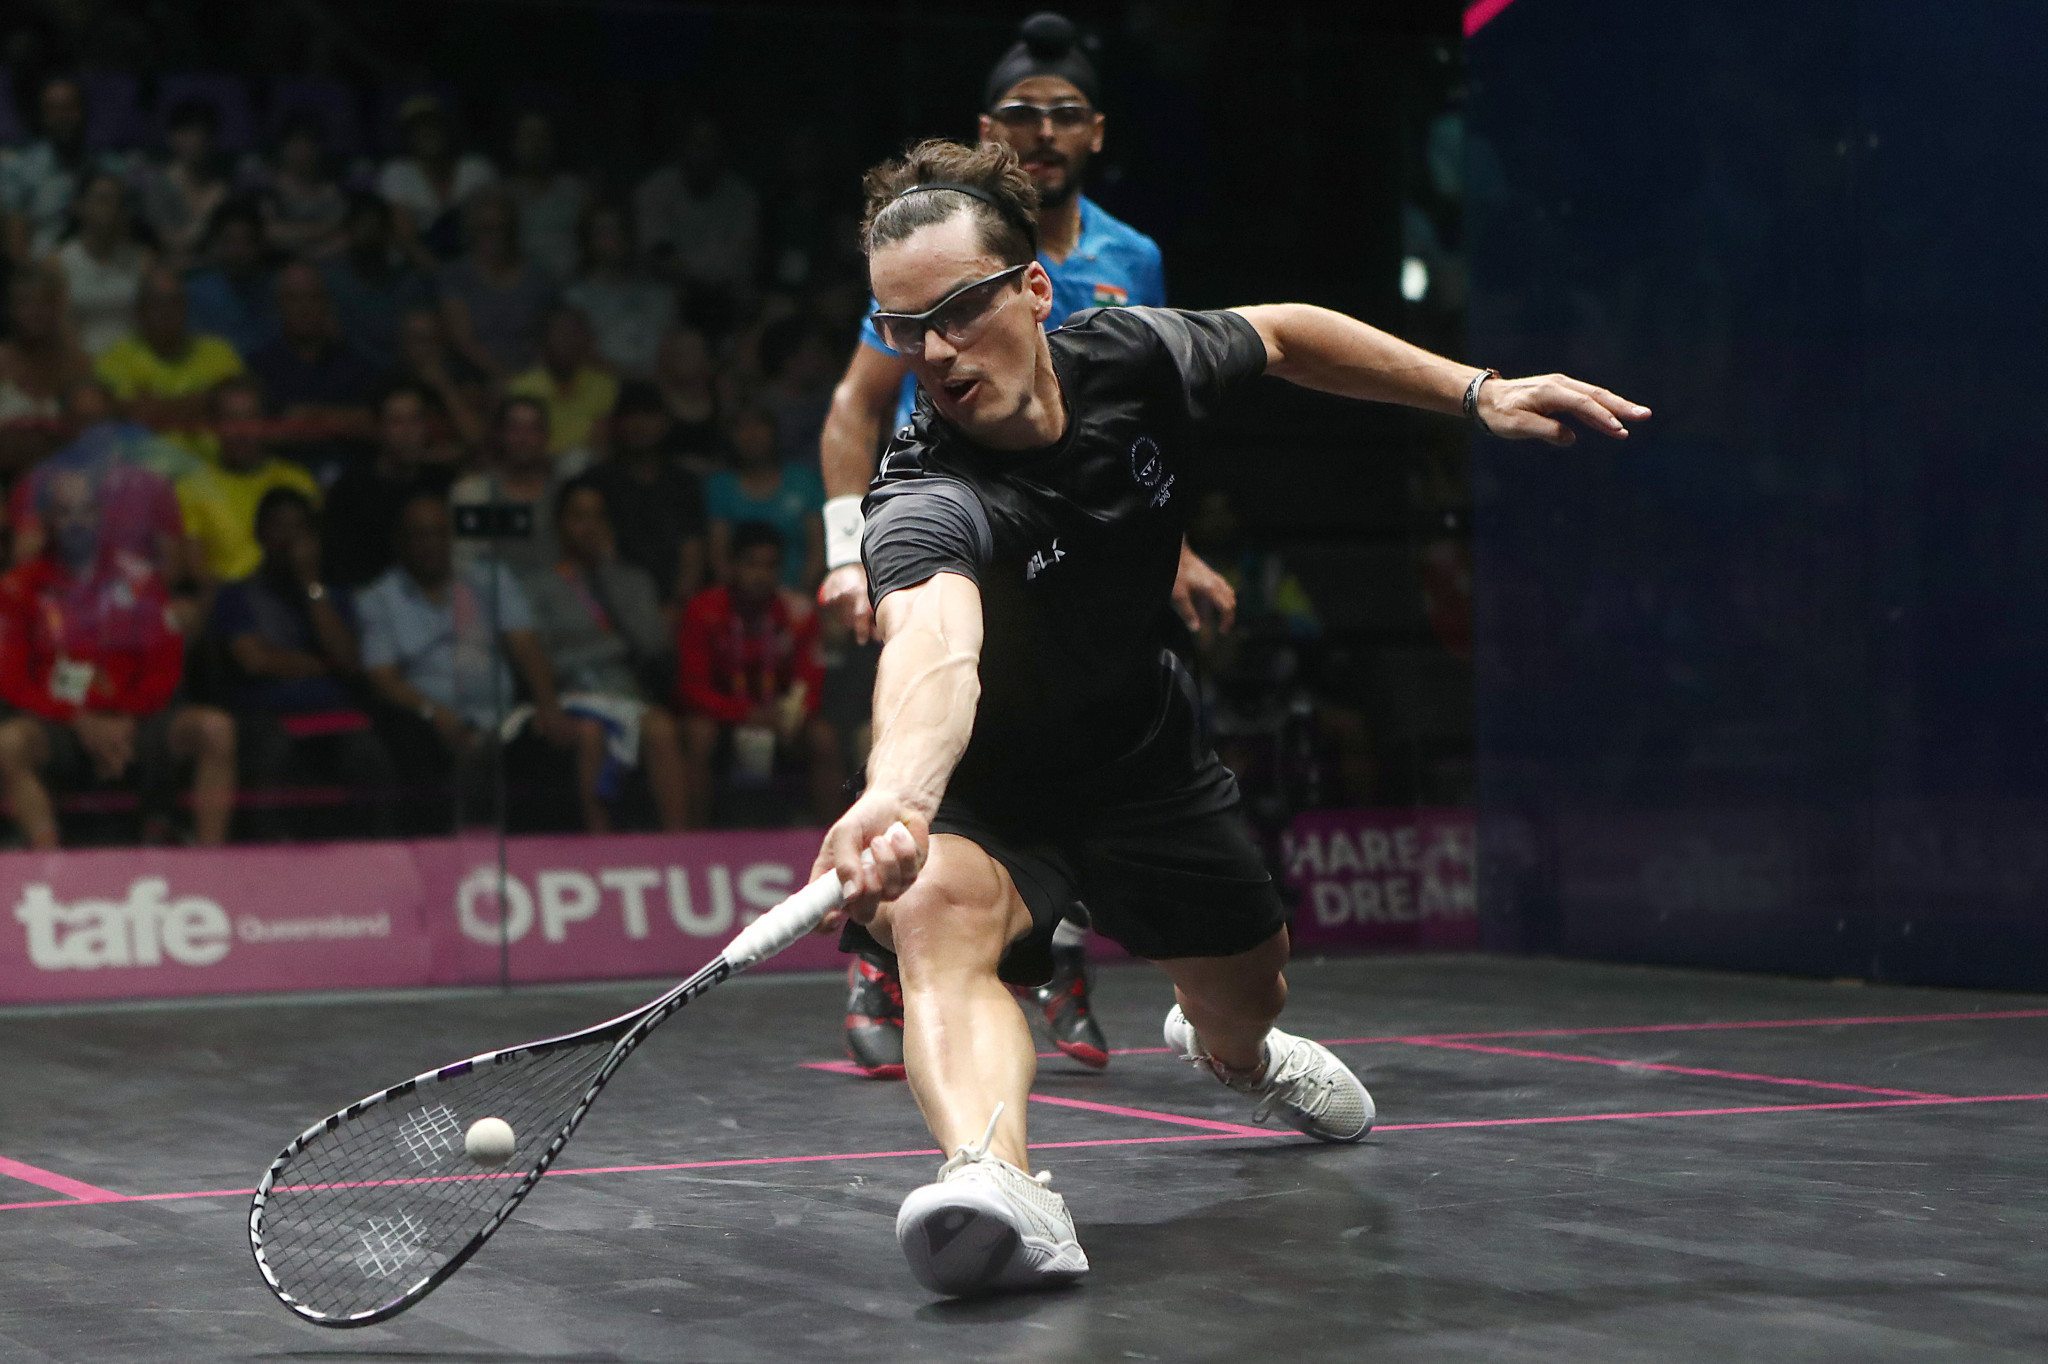 Paul Coll is set to become world number one in the PSA men's world rankings ©Getty Images